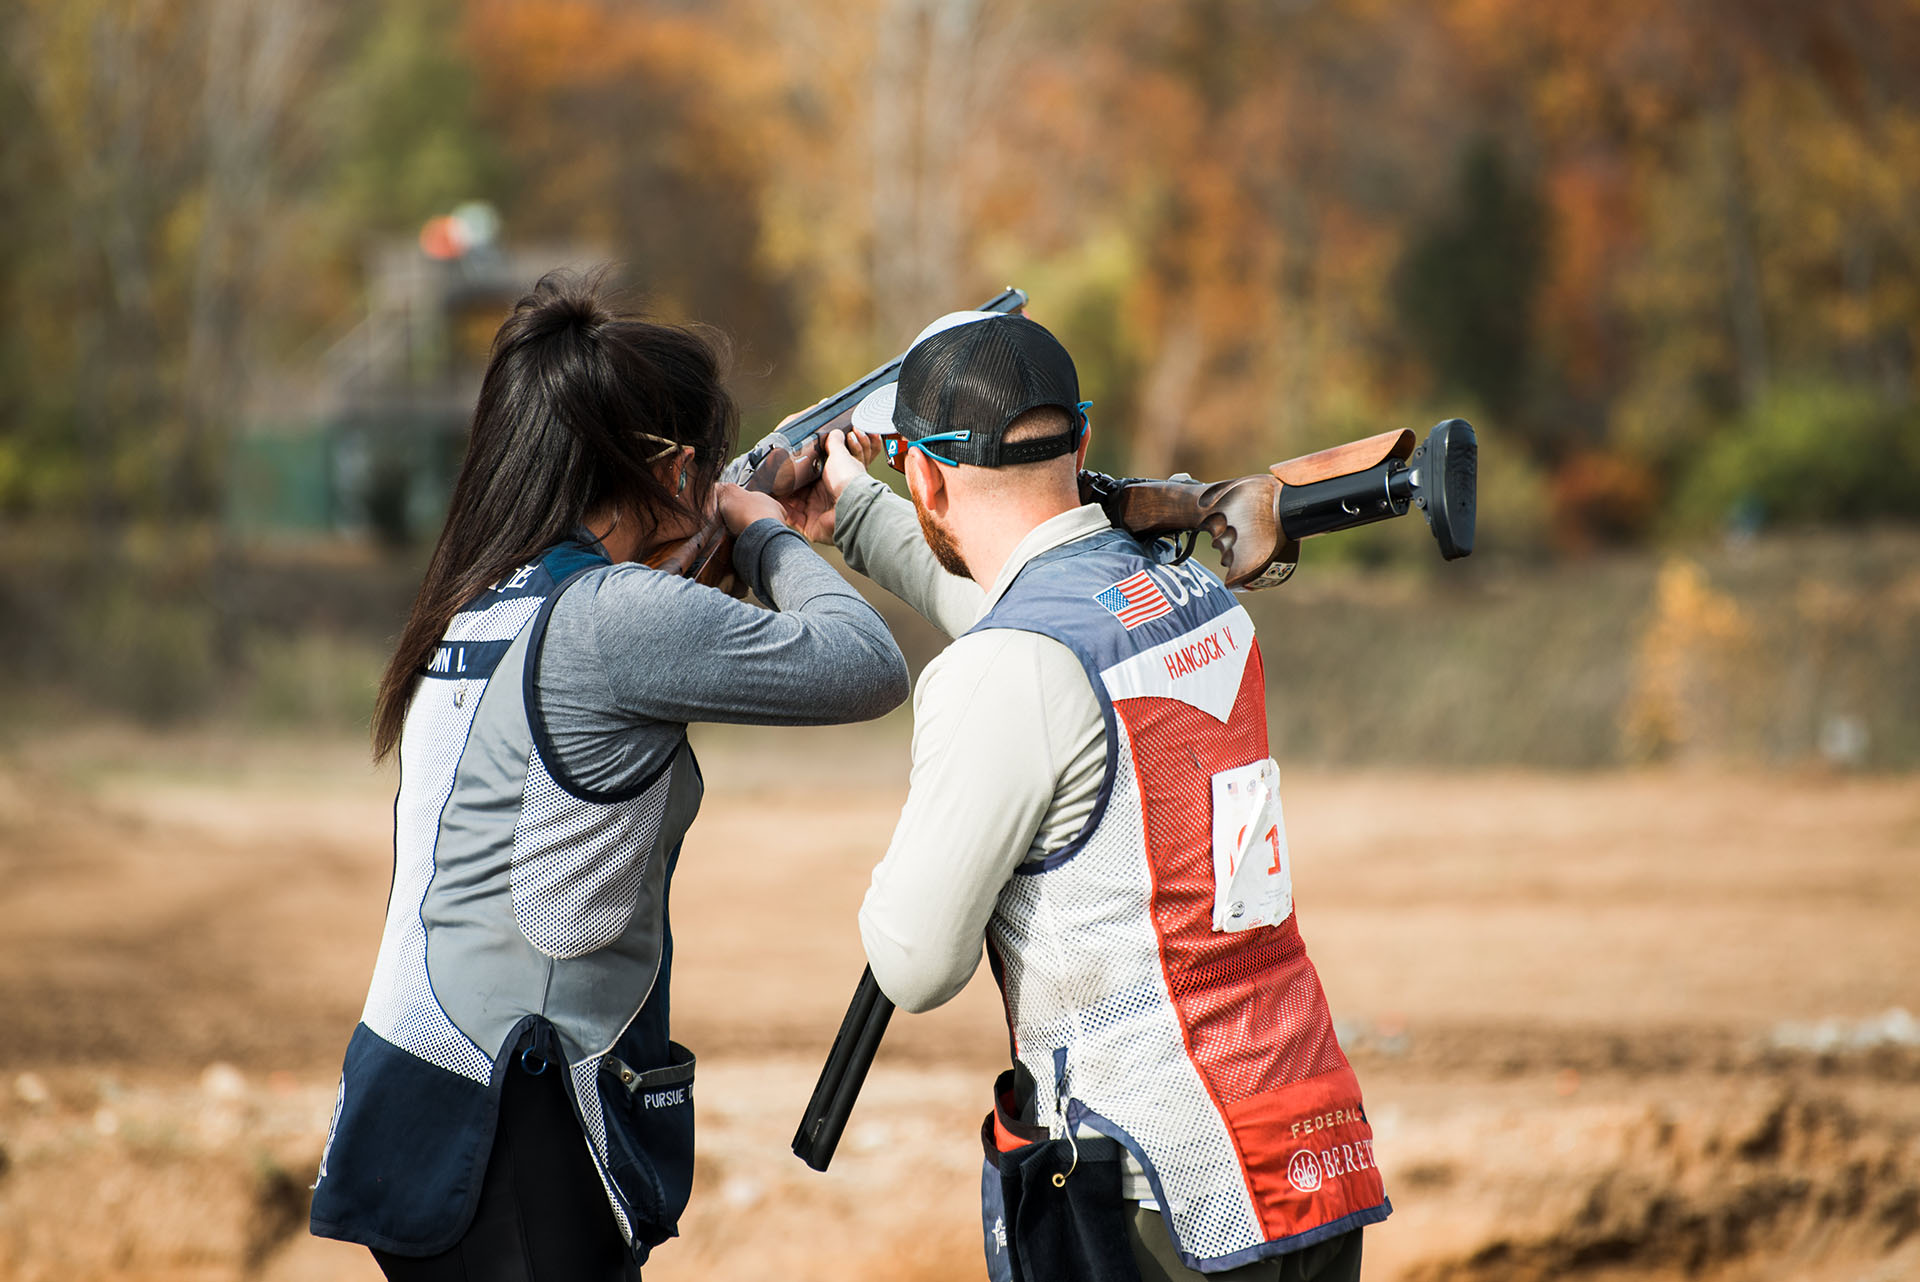 Female athlete aiming shotgun receiving assistance from shooting instructor.